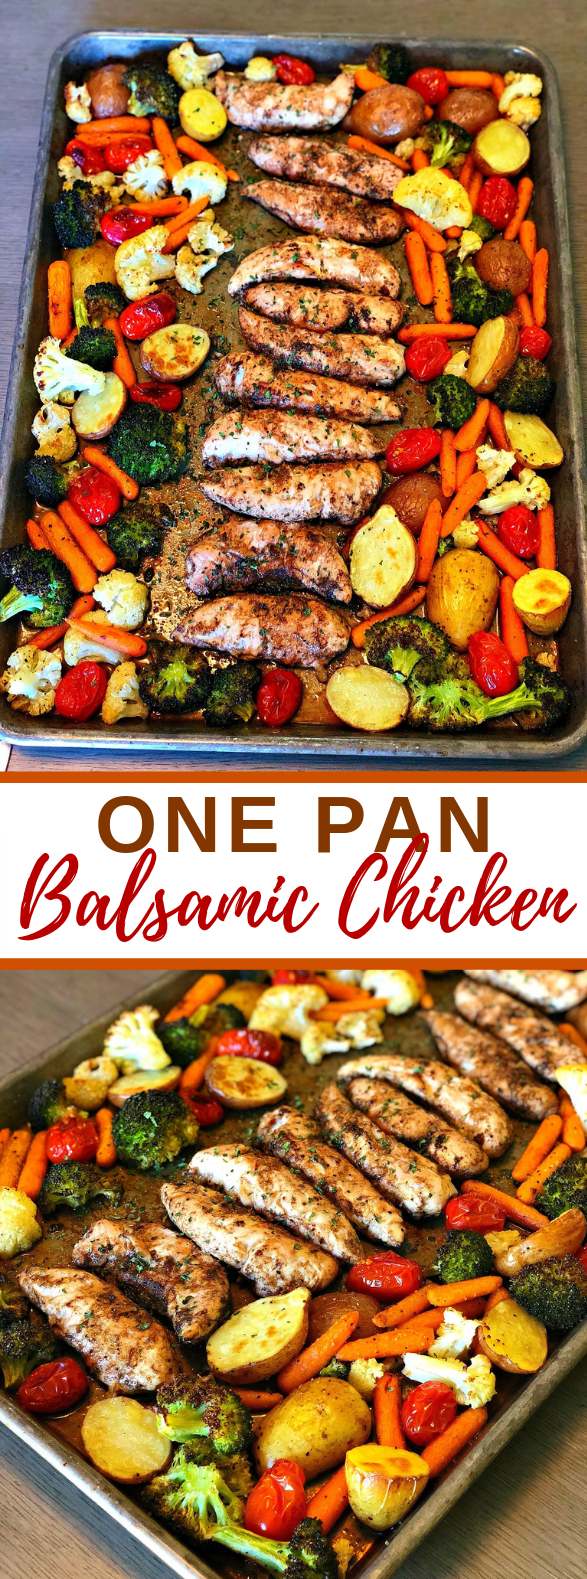 One Pan Balsamic Chicken #dinner #meal